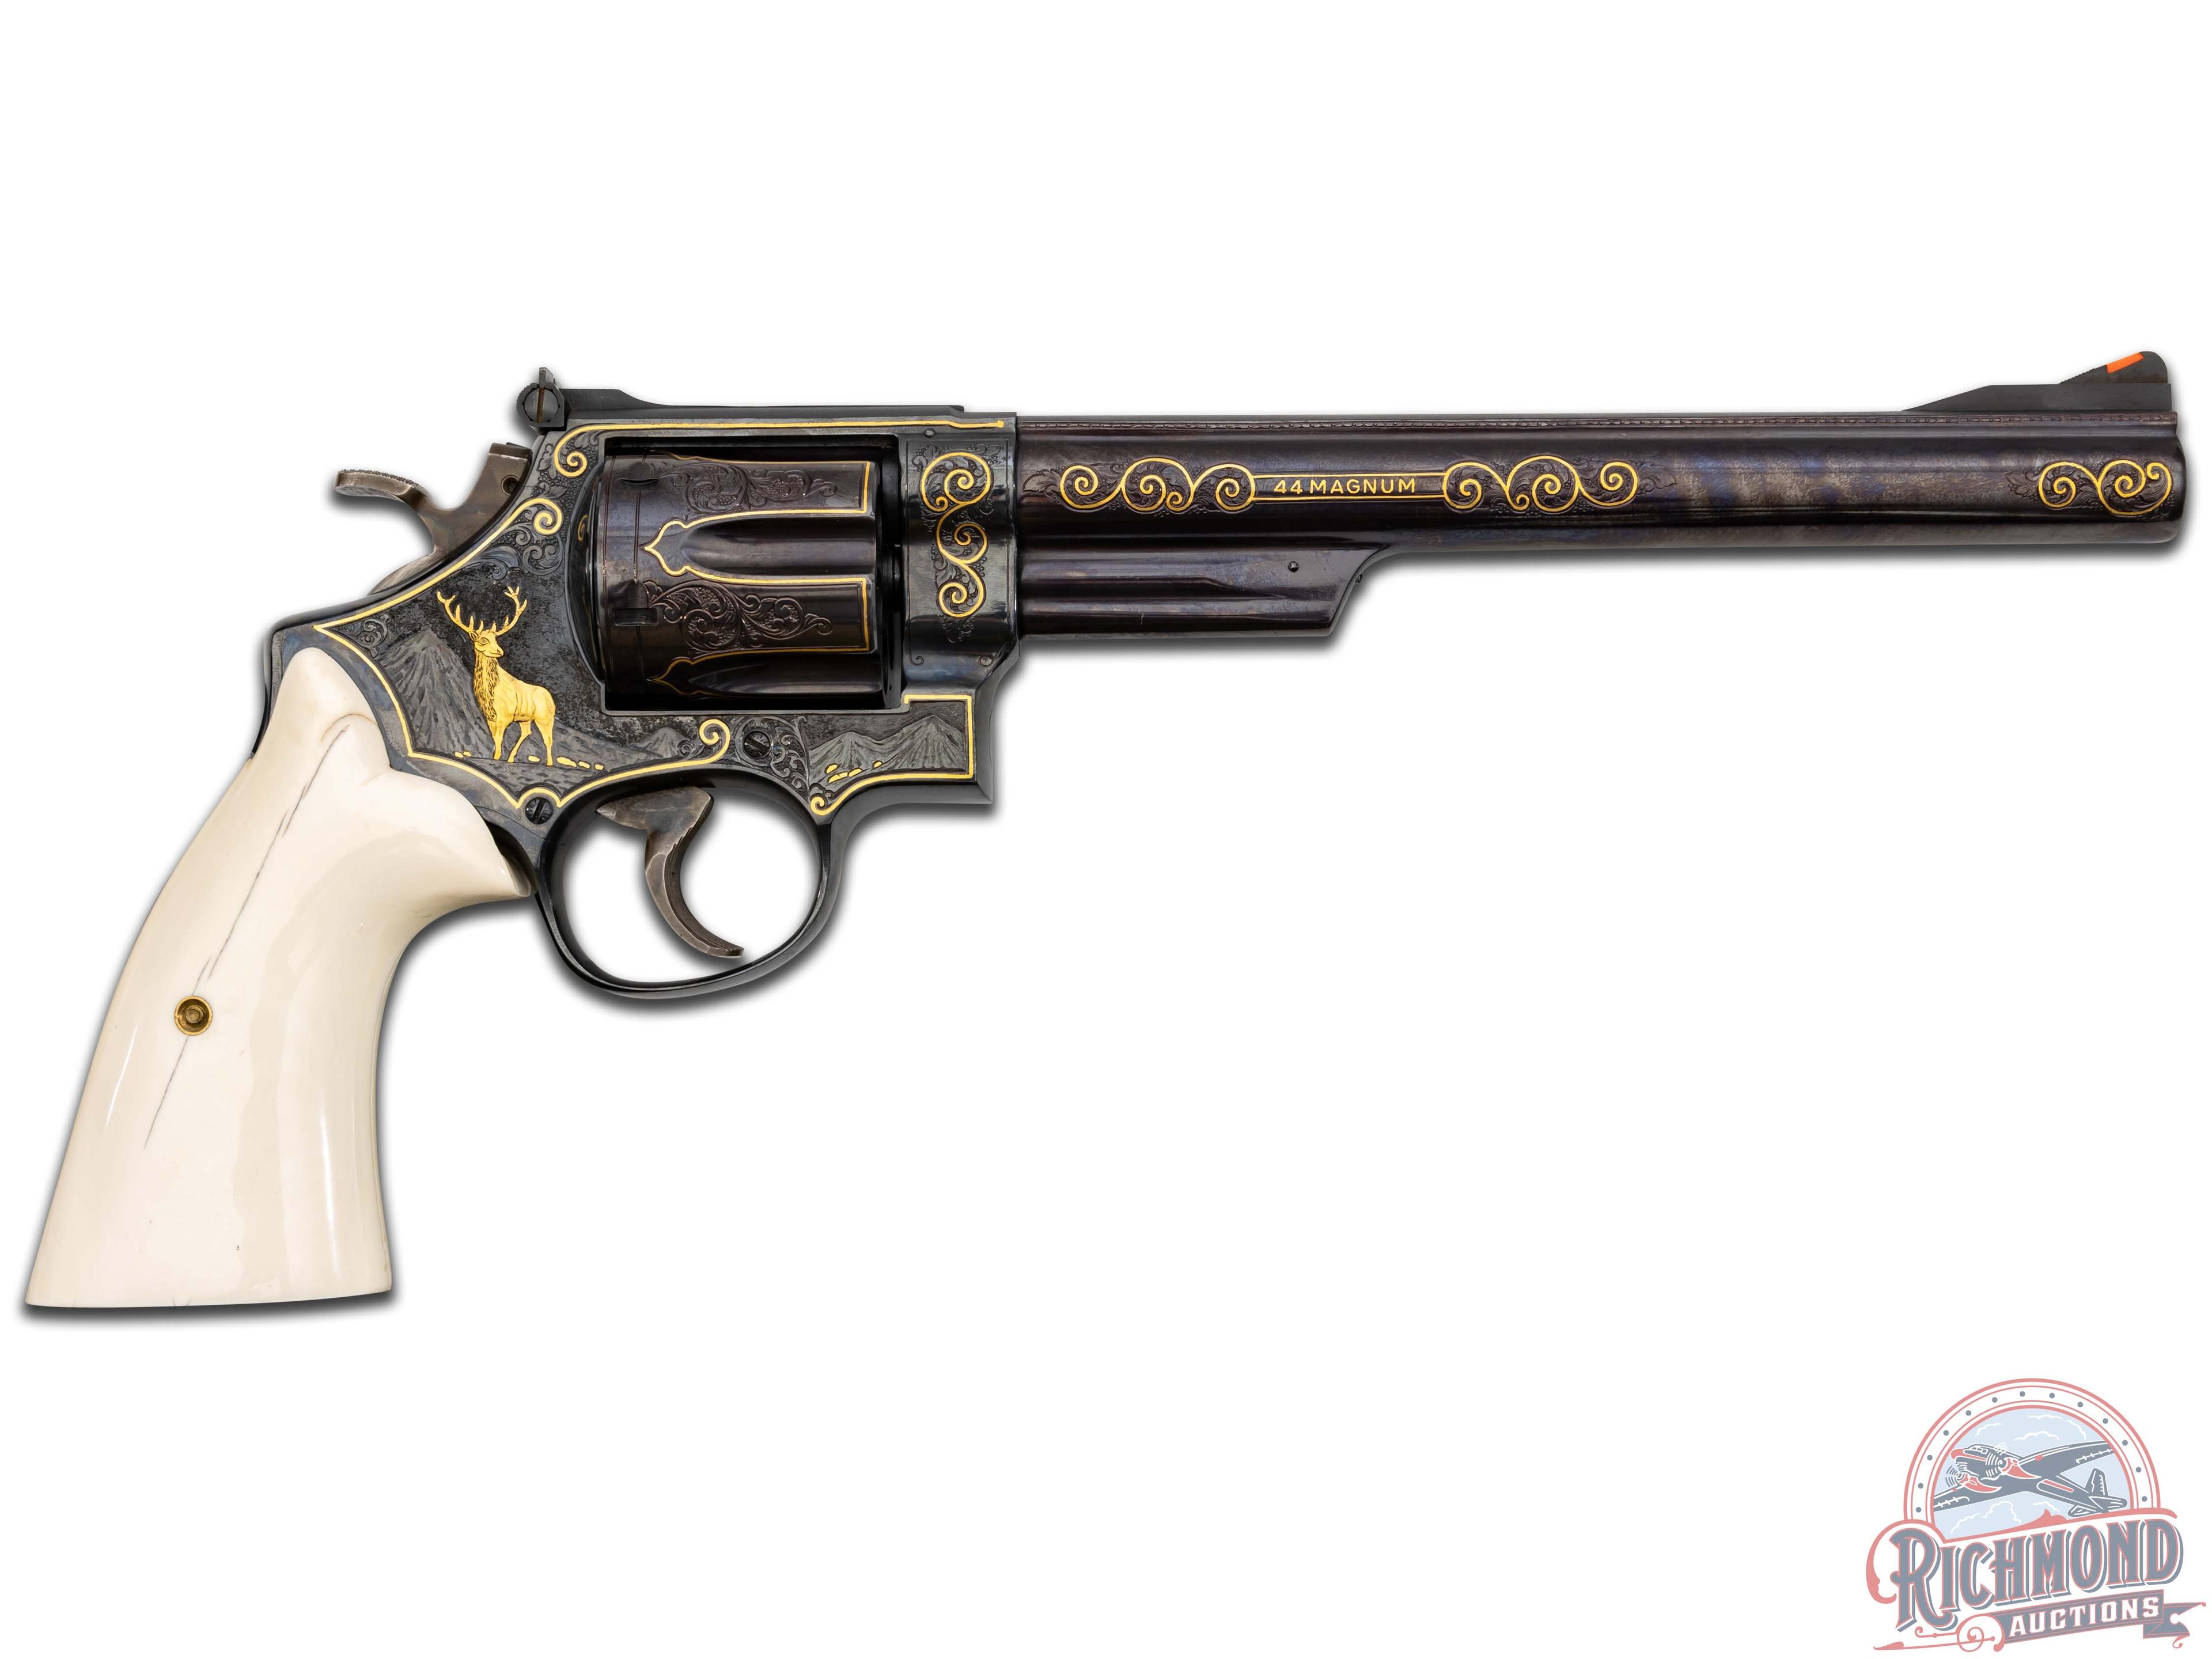 Exquisitely Engraved & Gold Inlay Smith & Wesson 29-2 .44 Mag Double Action Revolver